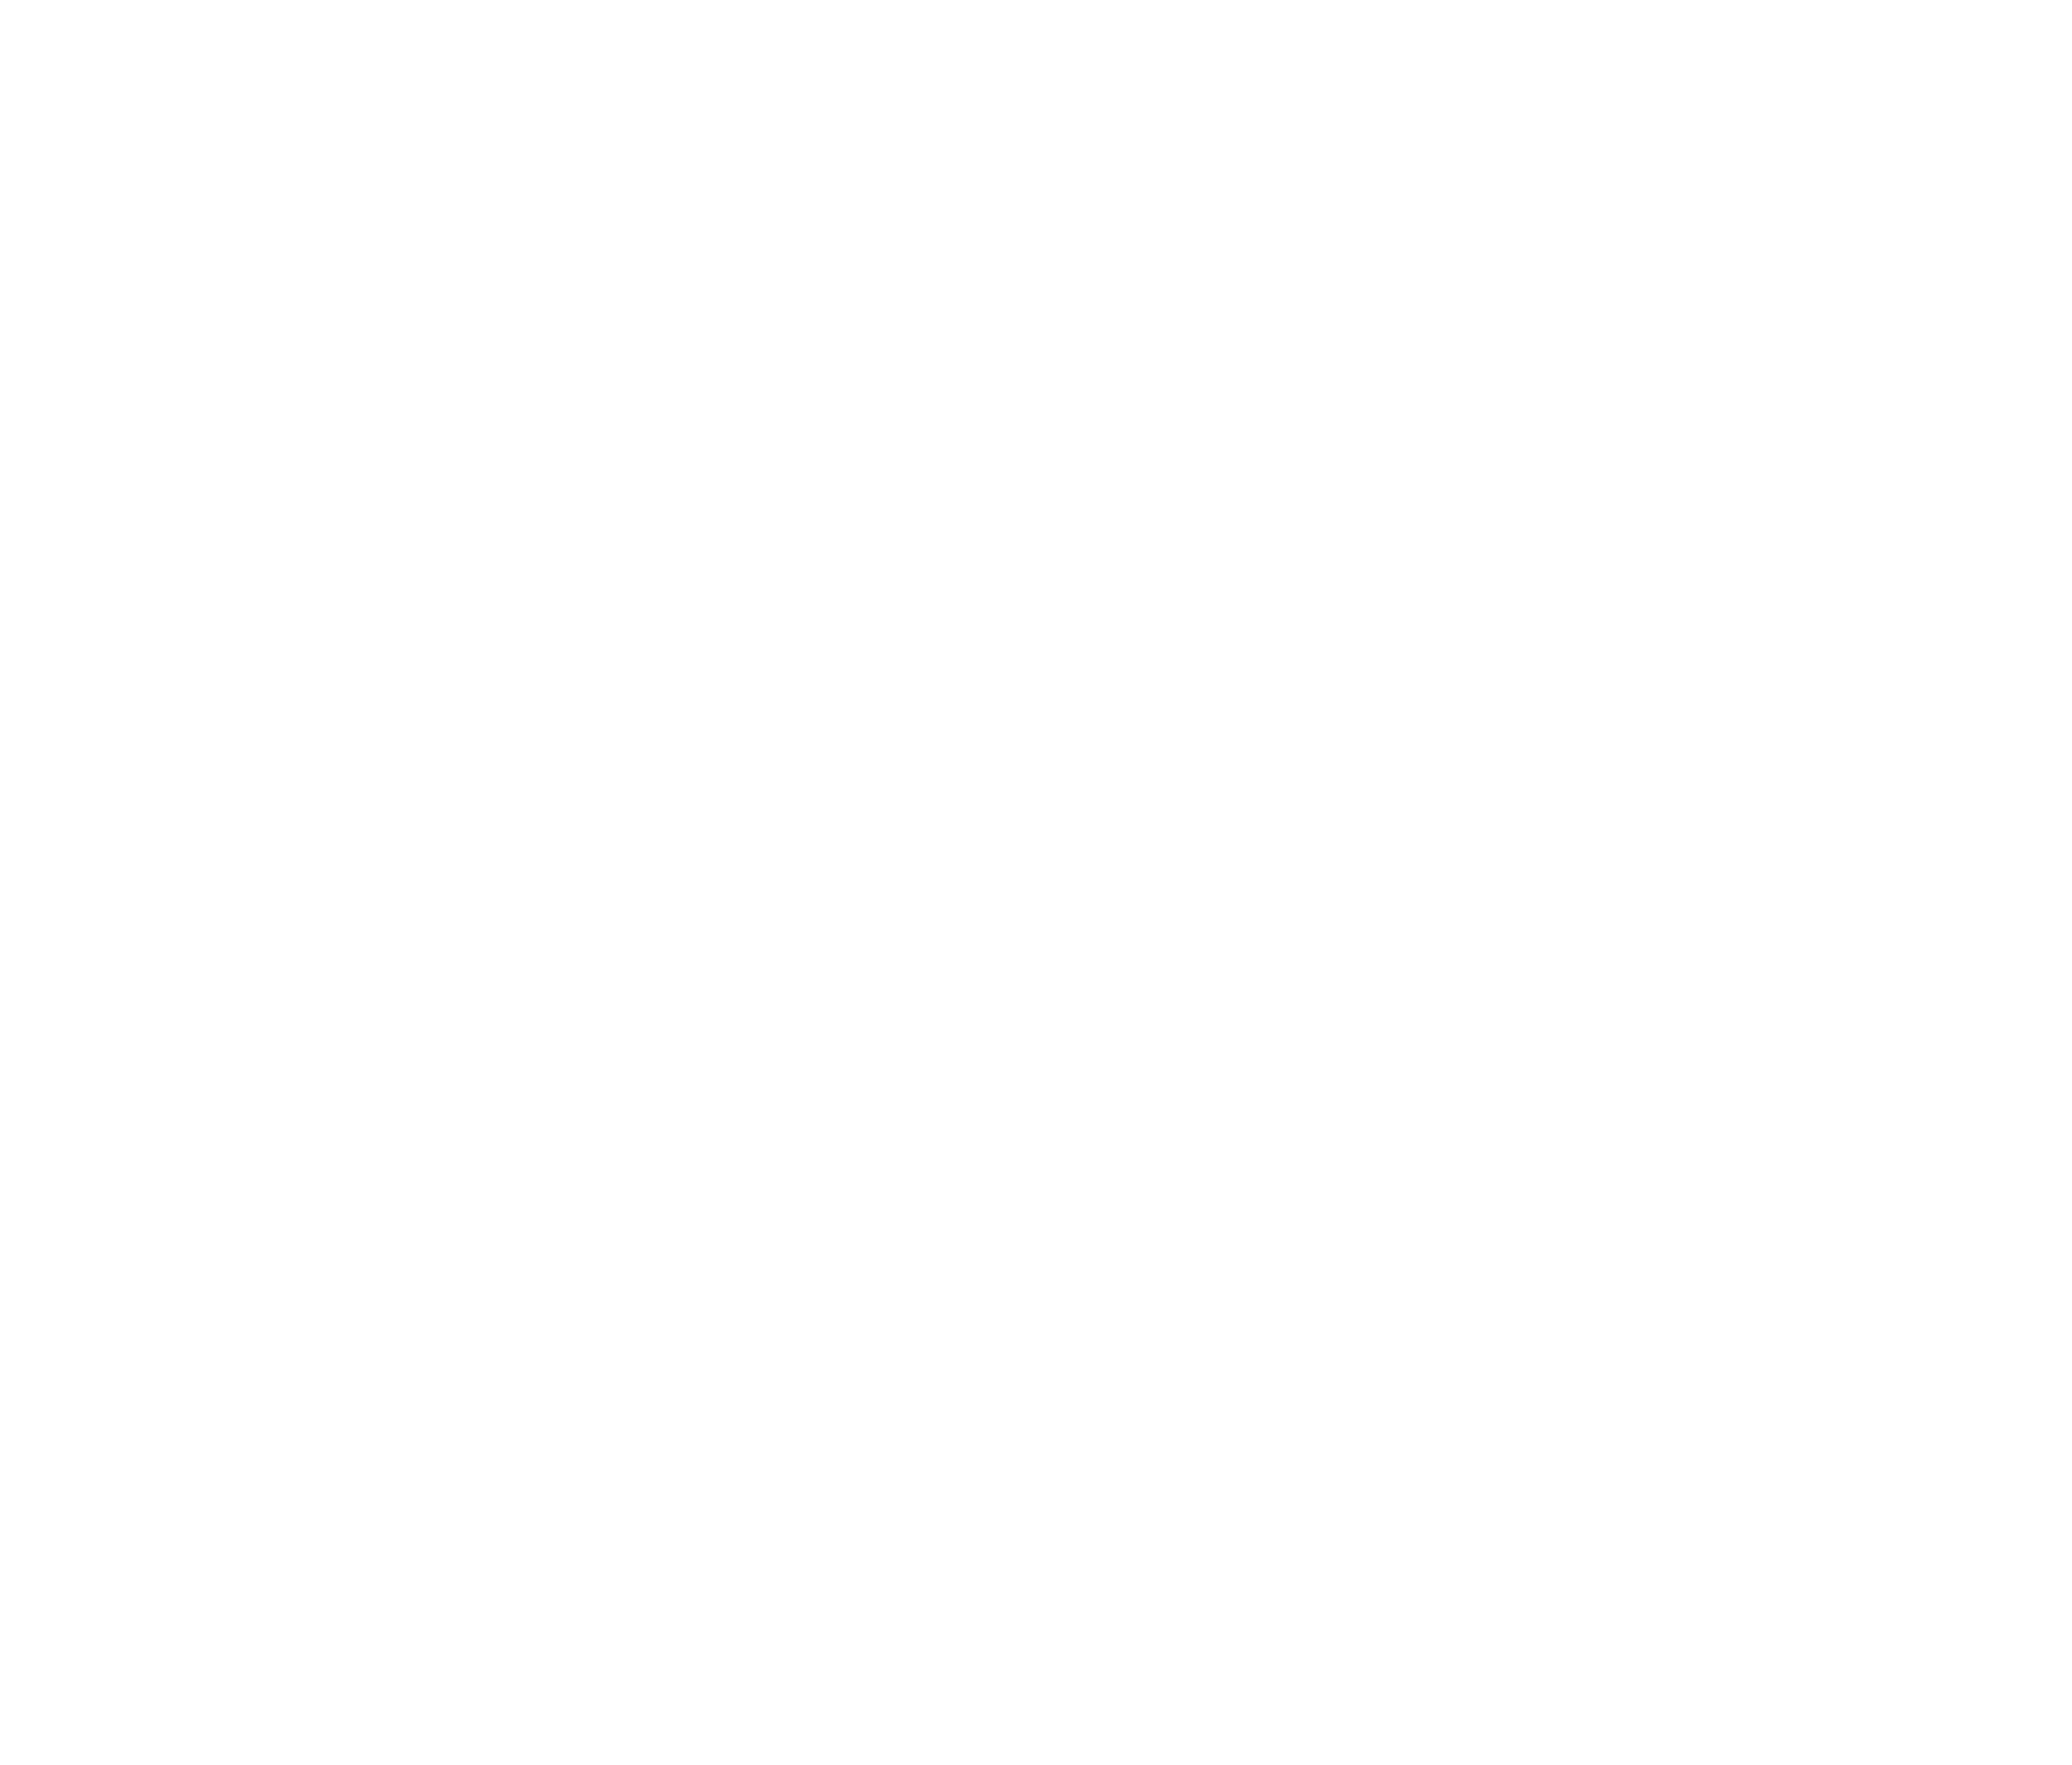 FEDERAL FIRE